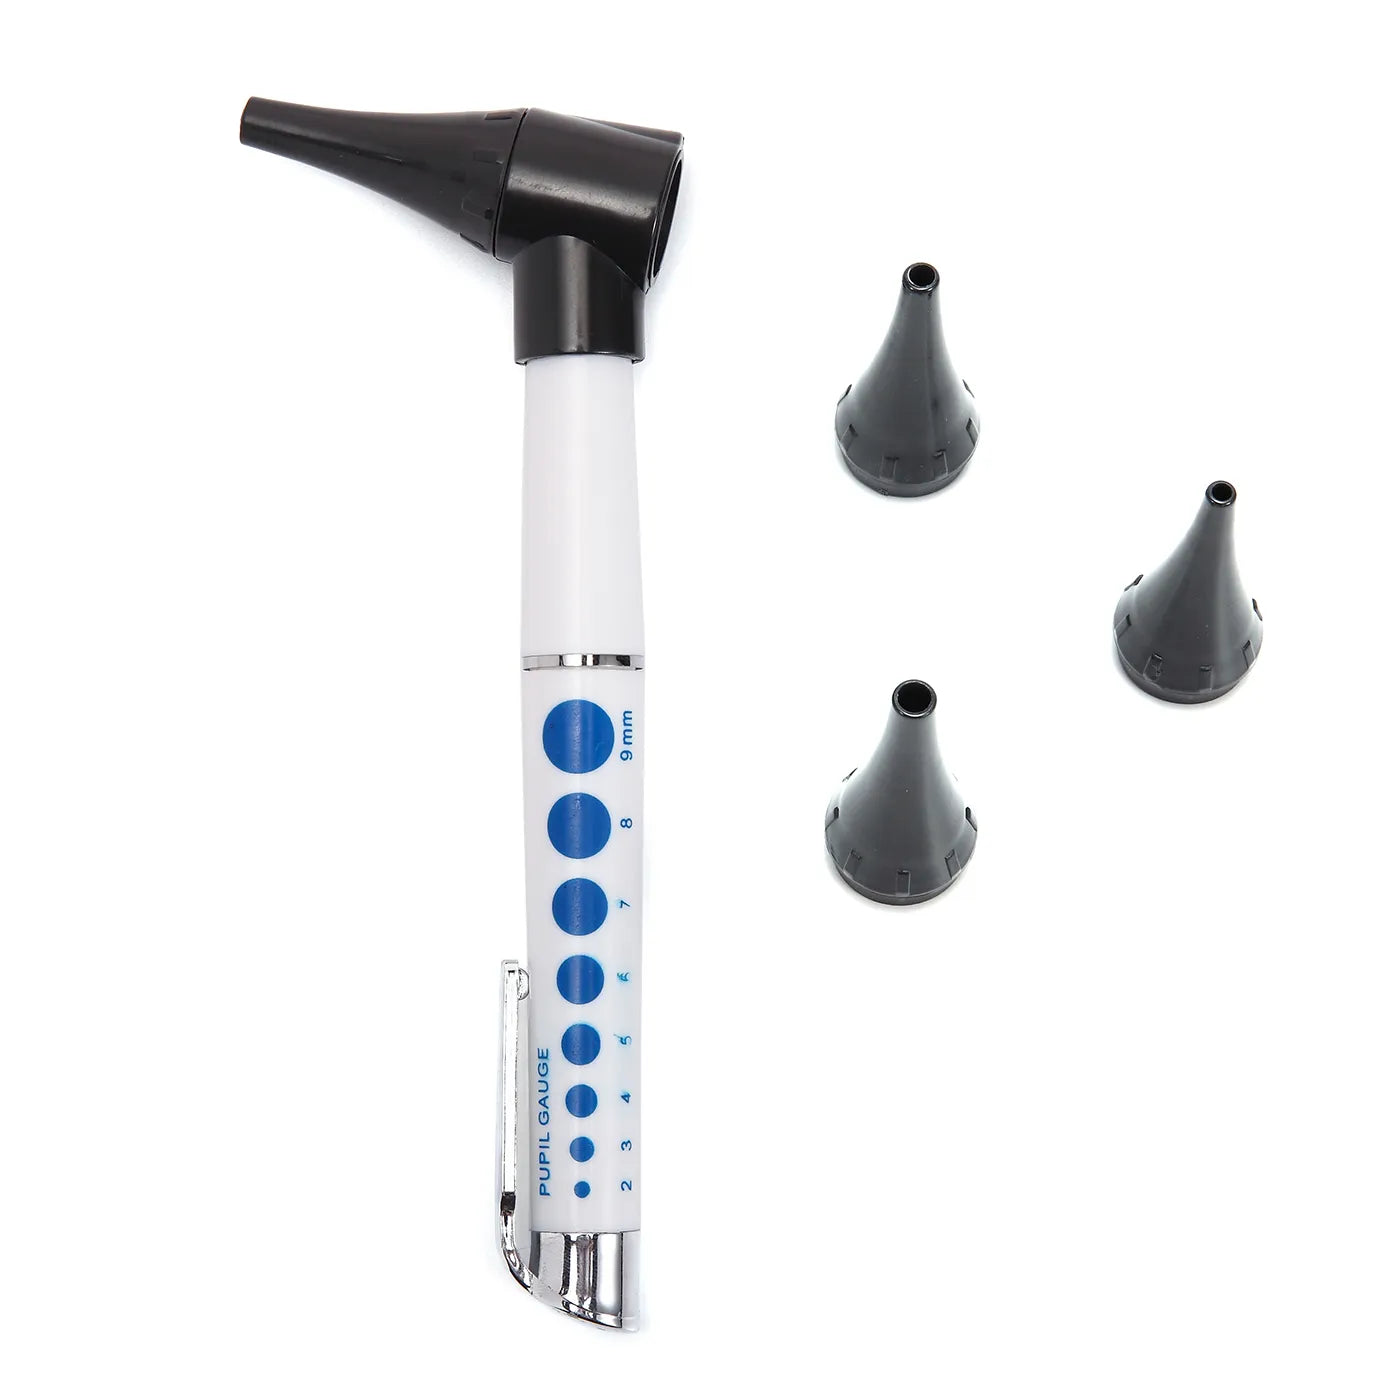 Clinical Diagnostic Ear Examination Set - Medical Otoscope & Ophthalmoscope Pen with Ear Light Magnifier & Cleaner